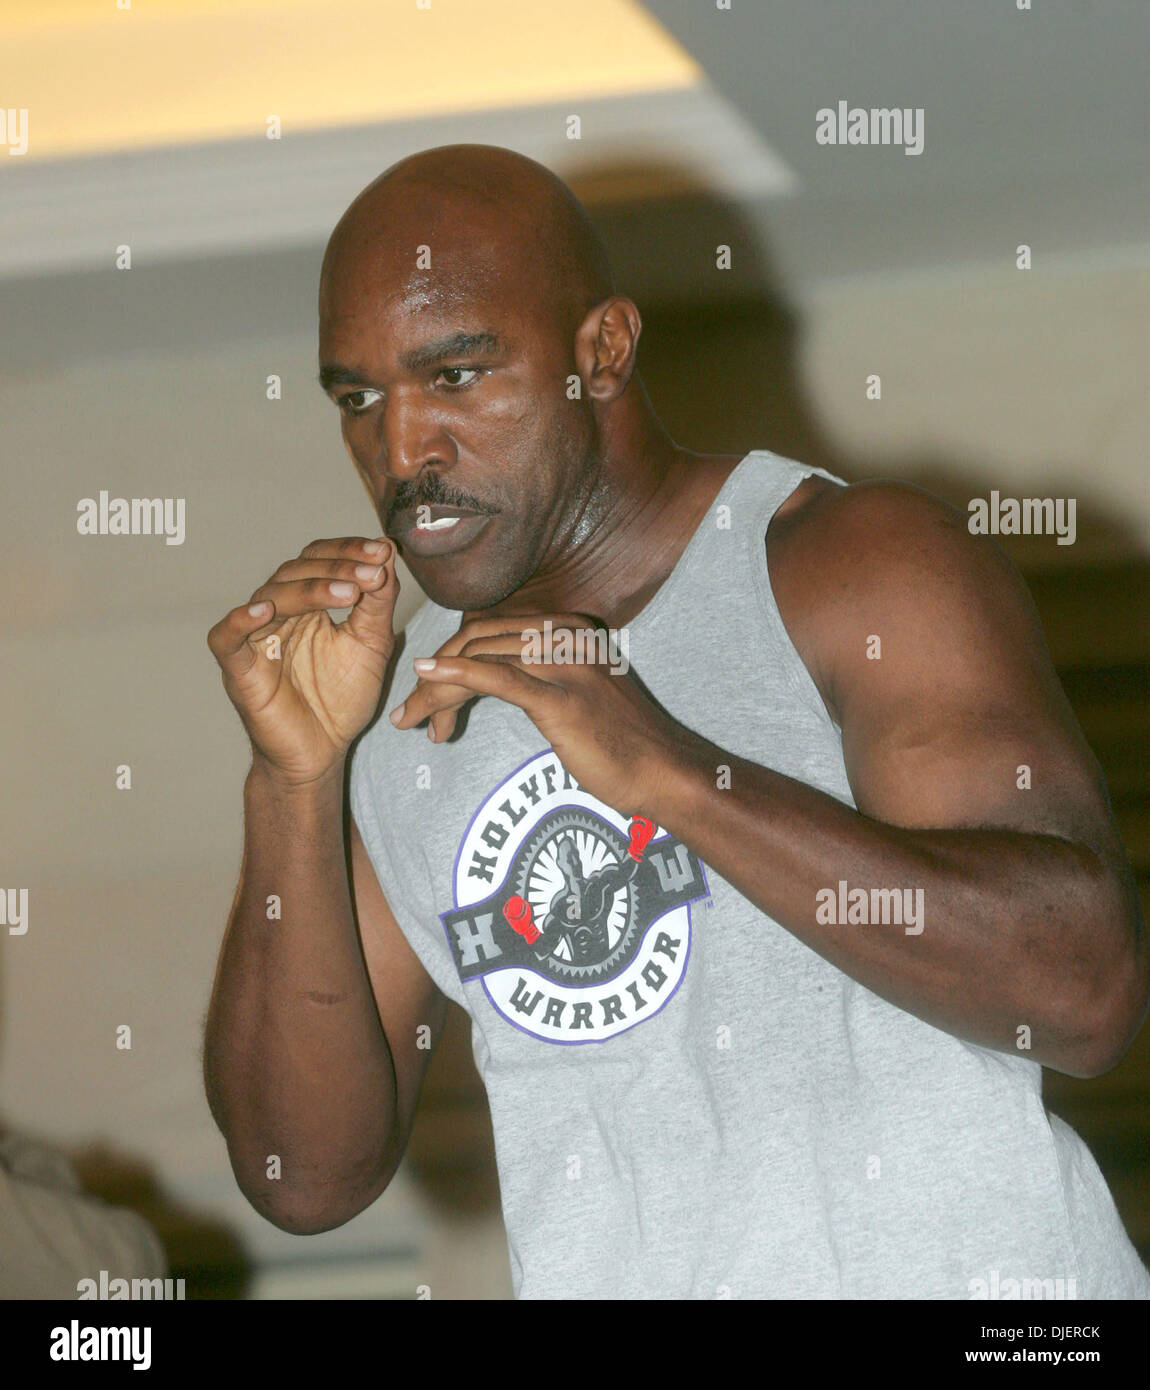 Oct 08, 2007 - Moscow, Russia - BOXING: EVANDER HOLYFIELD training in Moscow prior to his fight with Sultan Ibragimov on Oct. 13th in Moscow for the WBO World Heavyweight Championship. Holyfield's goal is to unify the heavyweight championship. (Credit Image: © Aleksander V.Chernykh/PhotoXpress/ZUMA Press) RESTRICTIONS: North and South America RIGHTS ONLY! Stock Photo